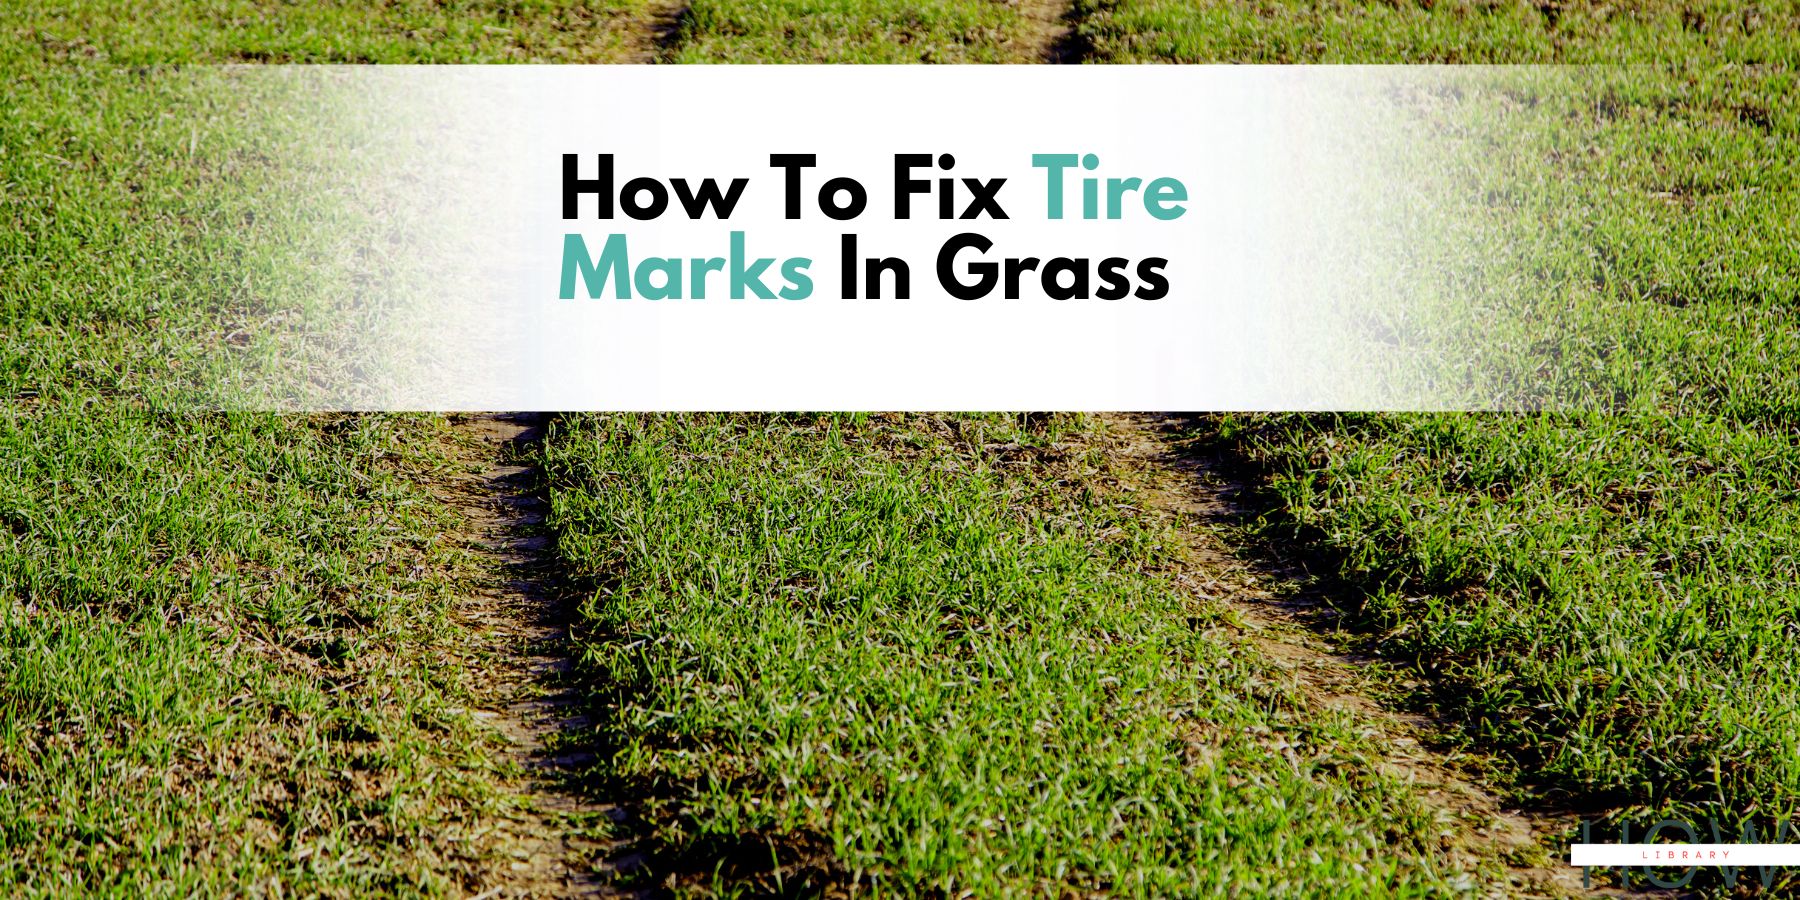 How To Fix Tire Marks In Grass